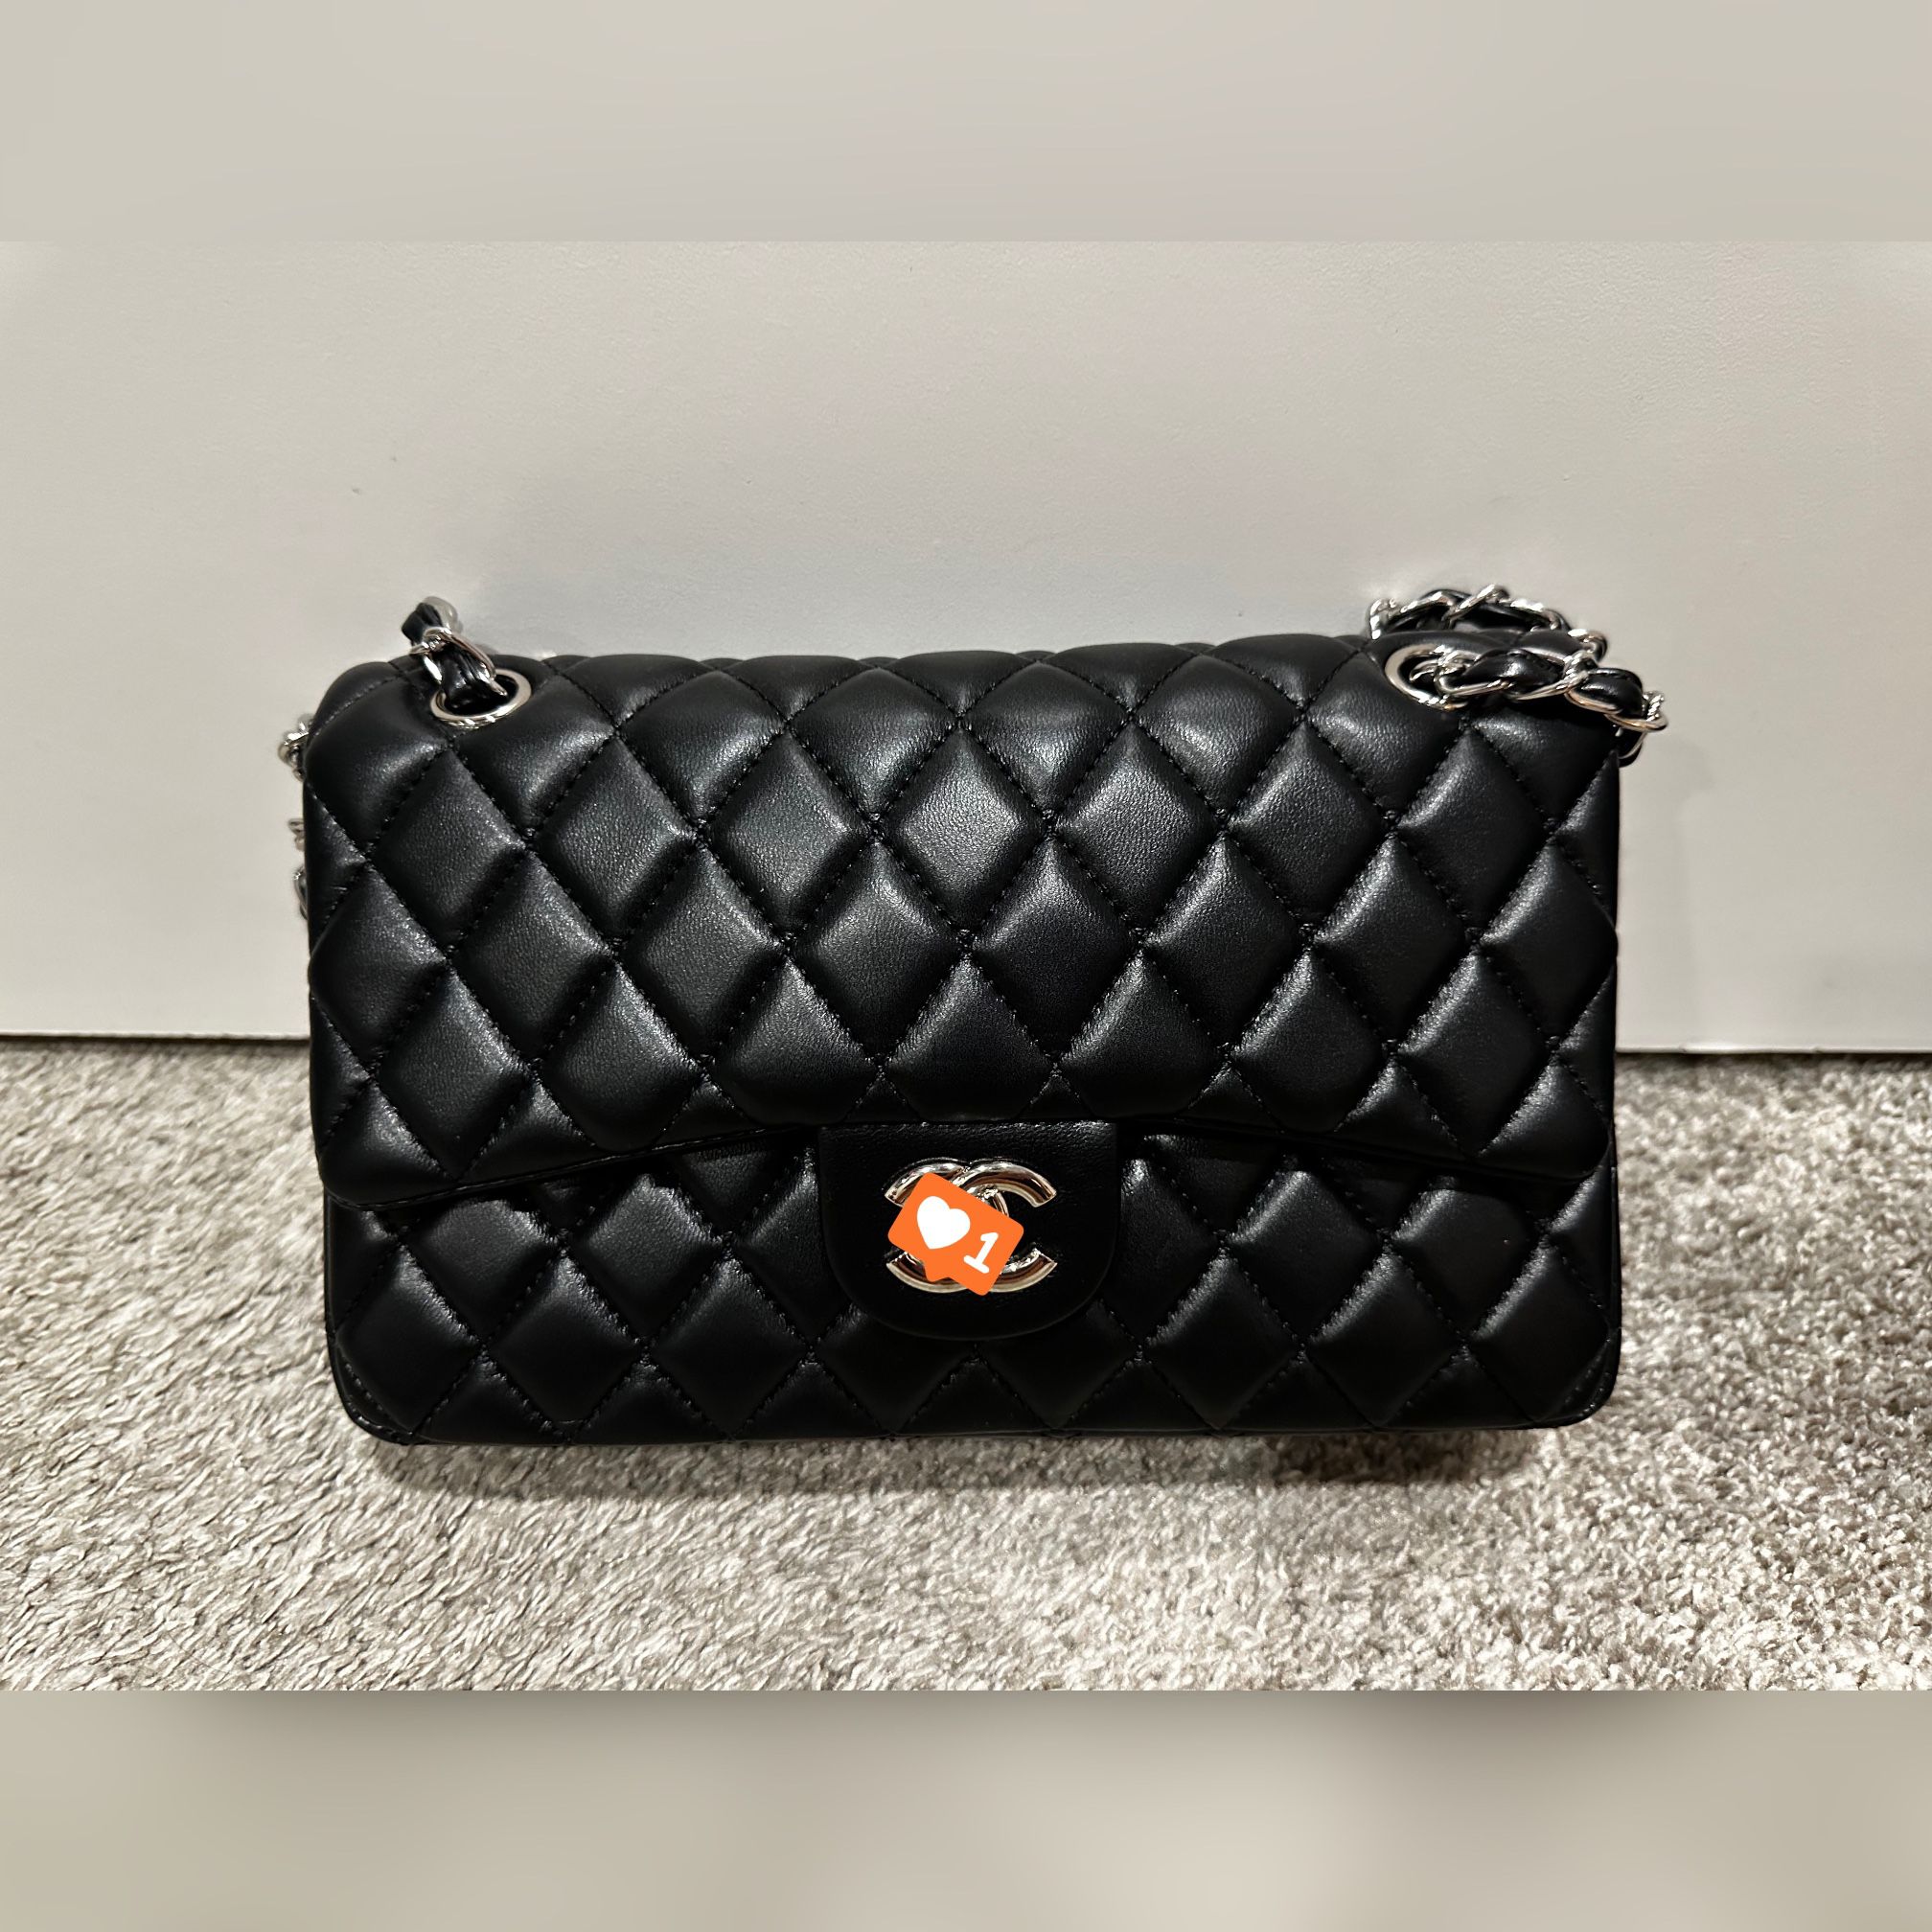 Black C Chain Purse for Sale in San Diego, CA - OfferUp